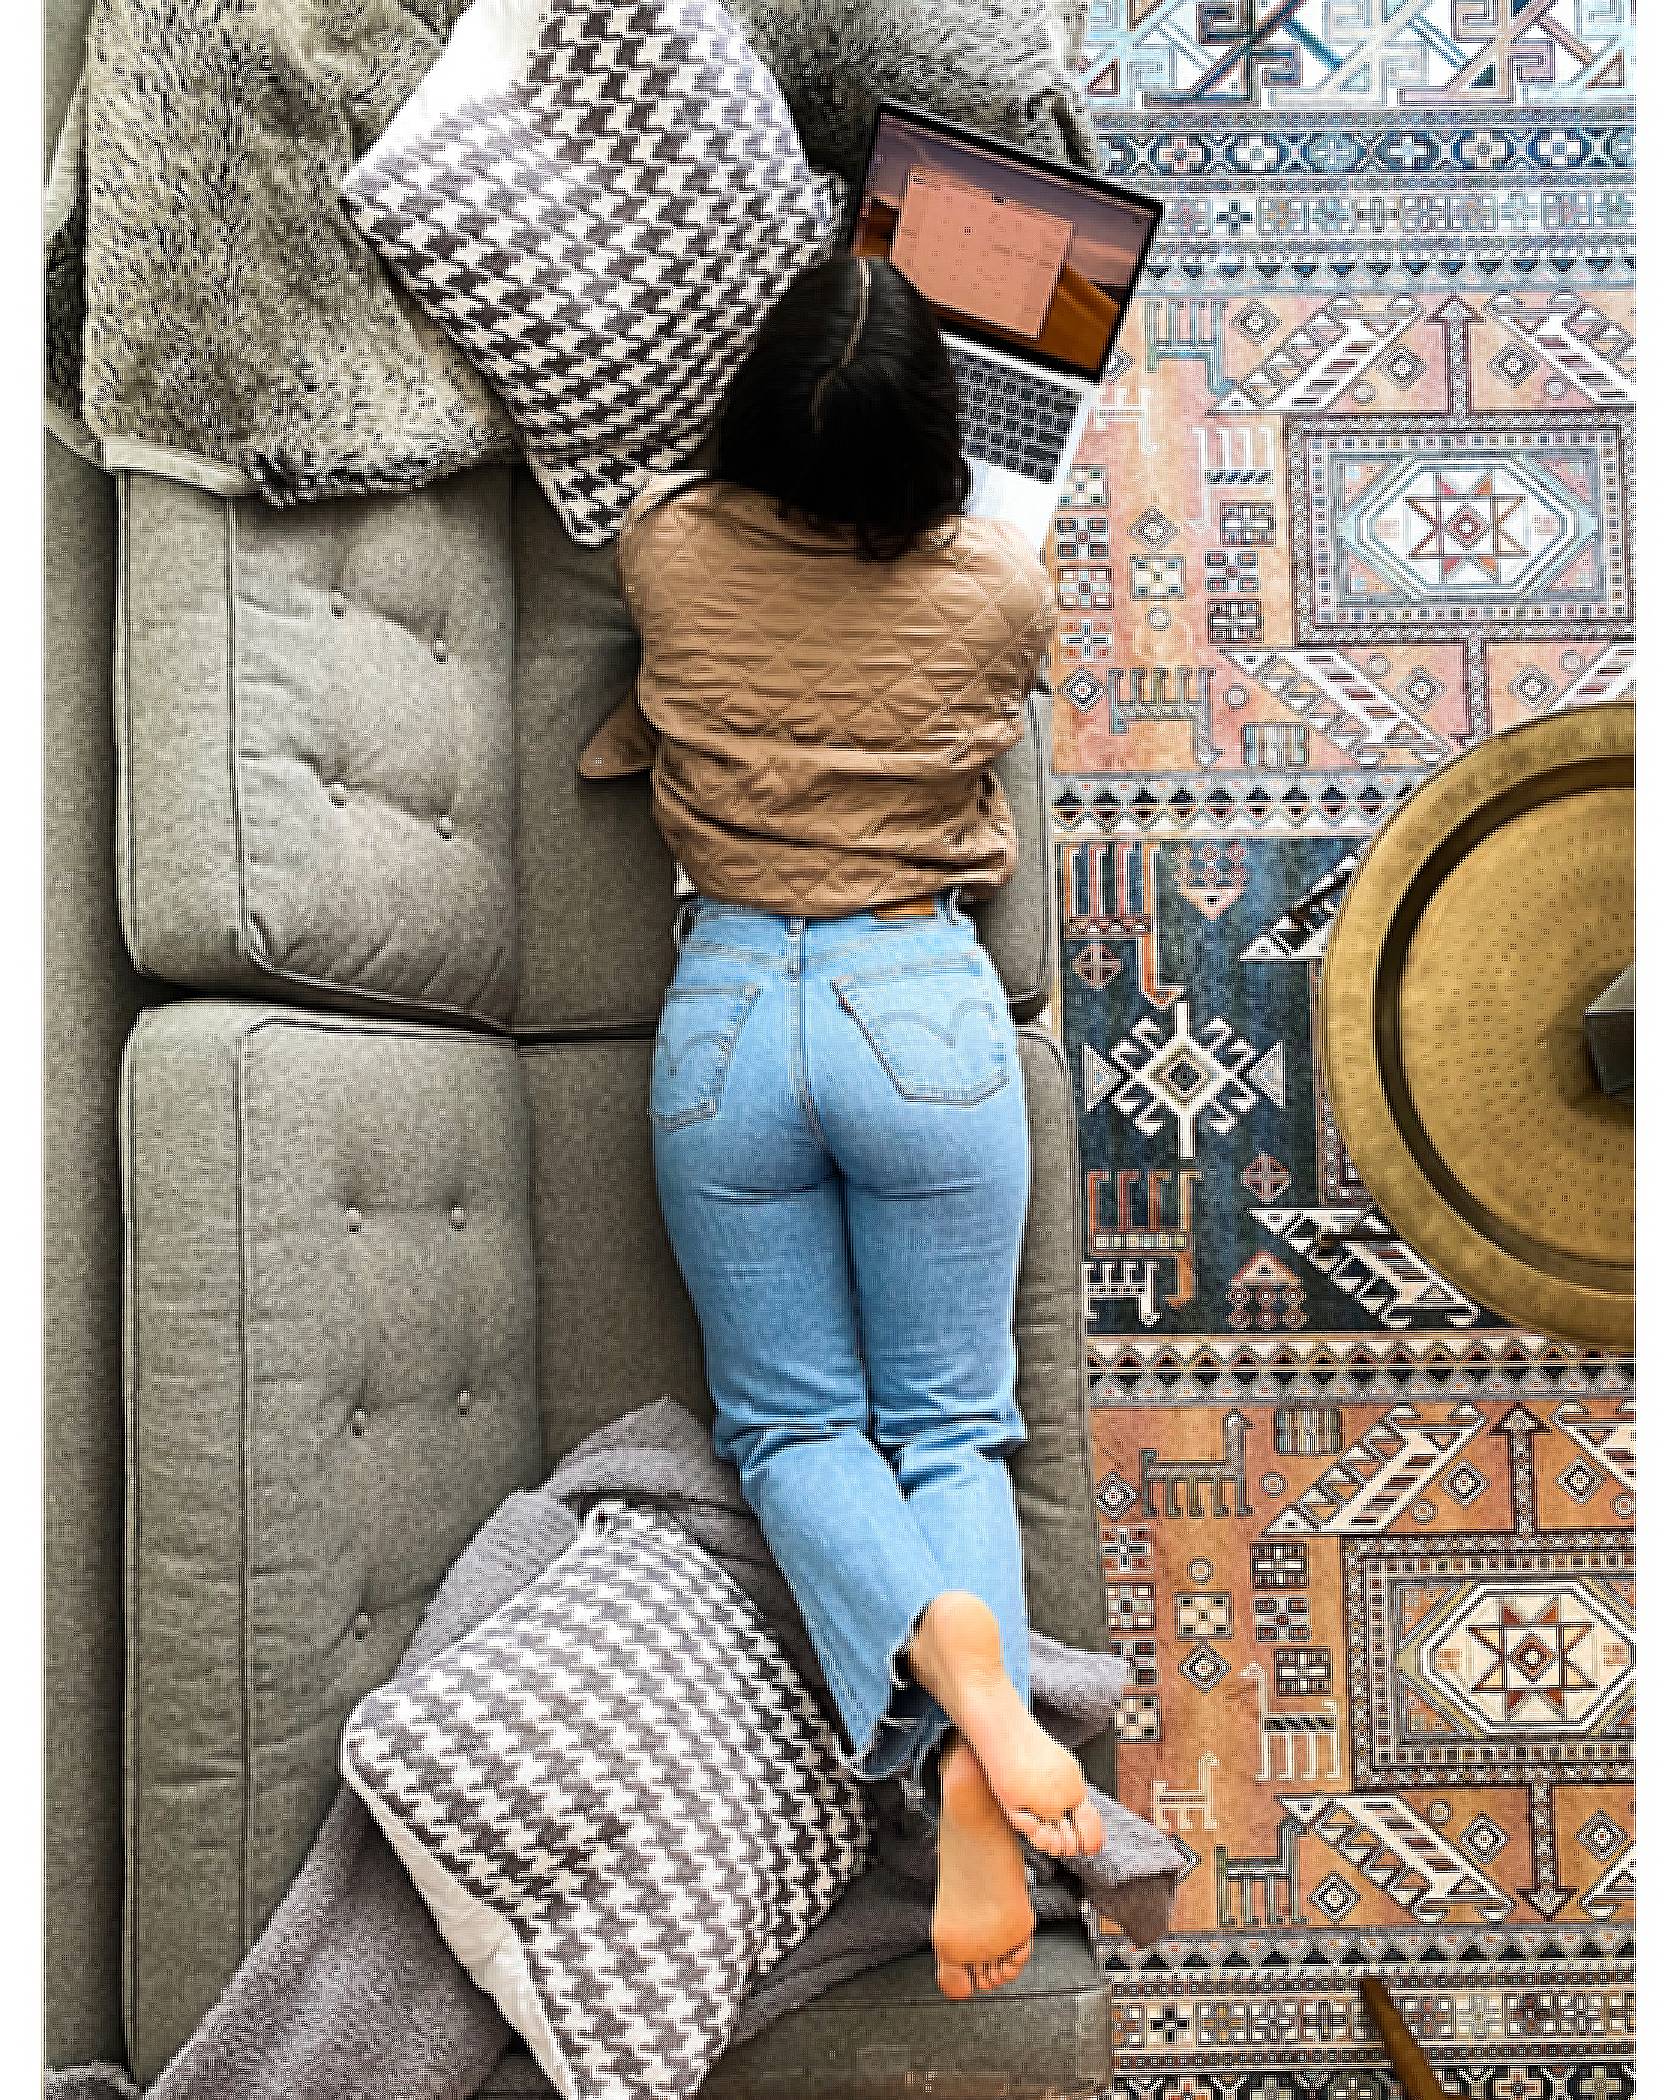 Aerial shot of Zoe Chrysochoos lying on her couch on her stomach with her laptop open. She is wearing a brown top and Levi's jeans.